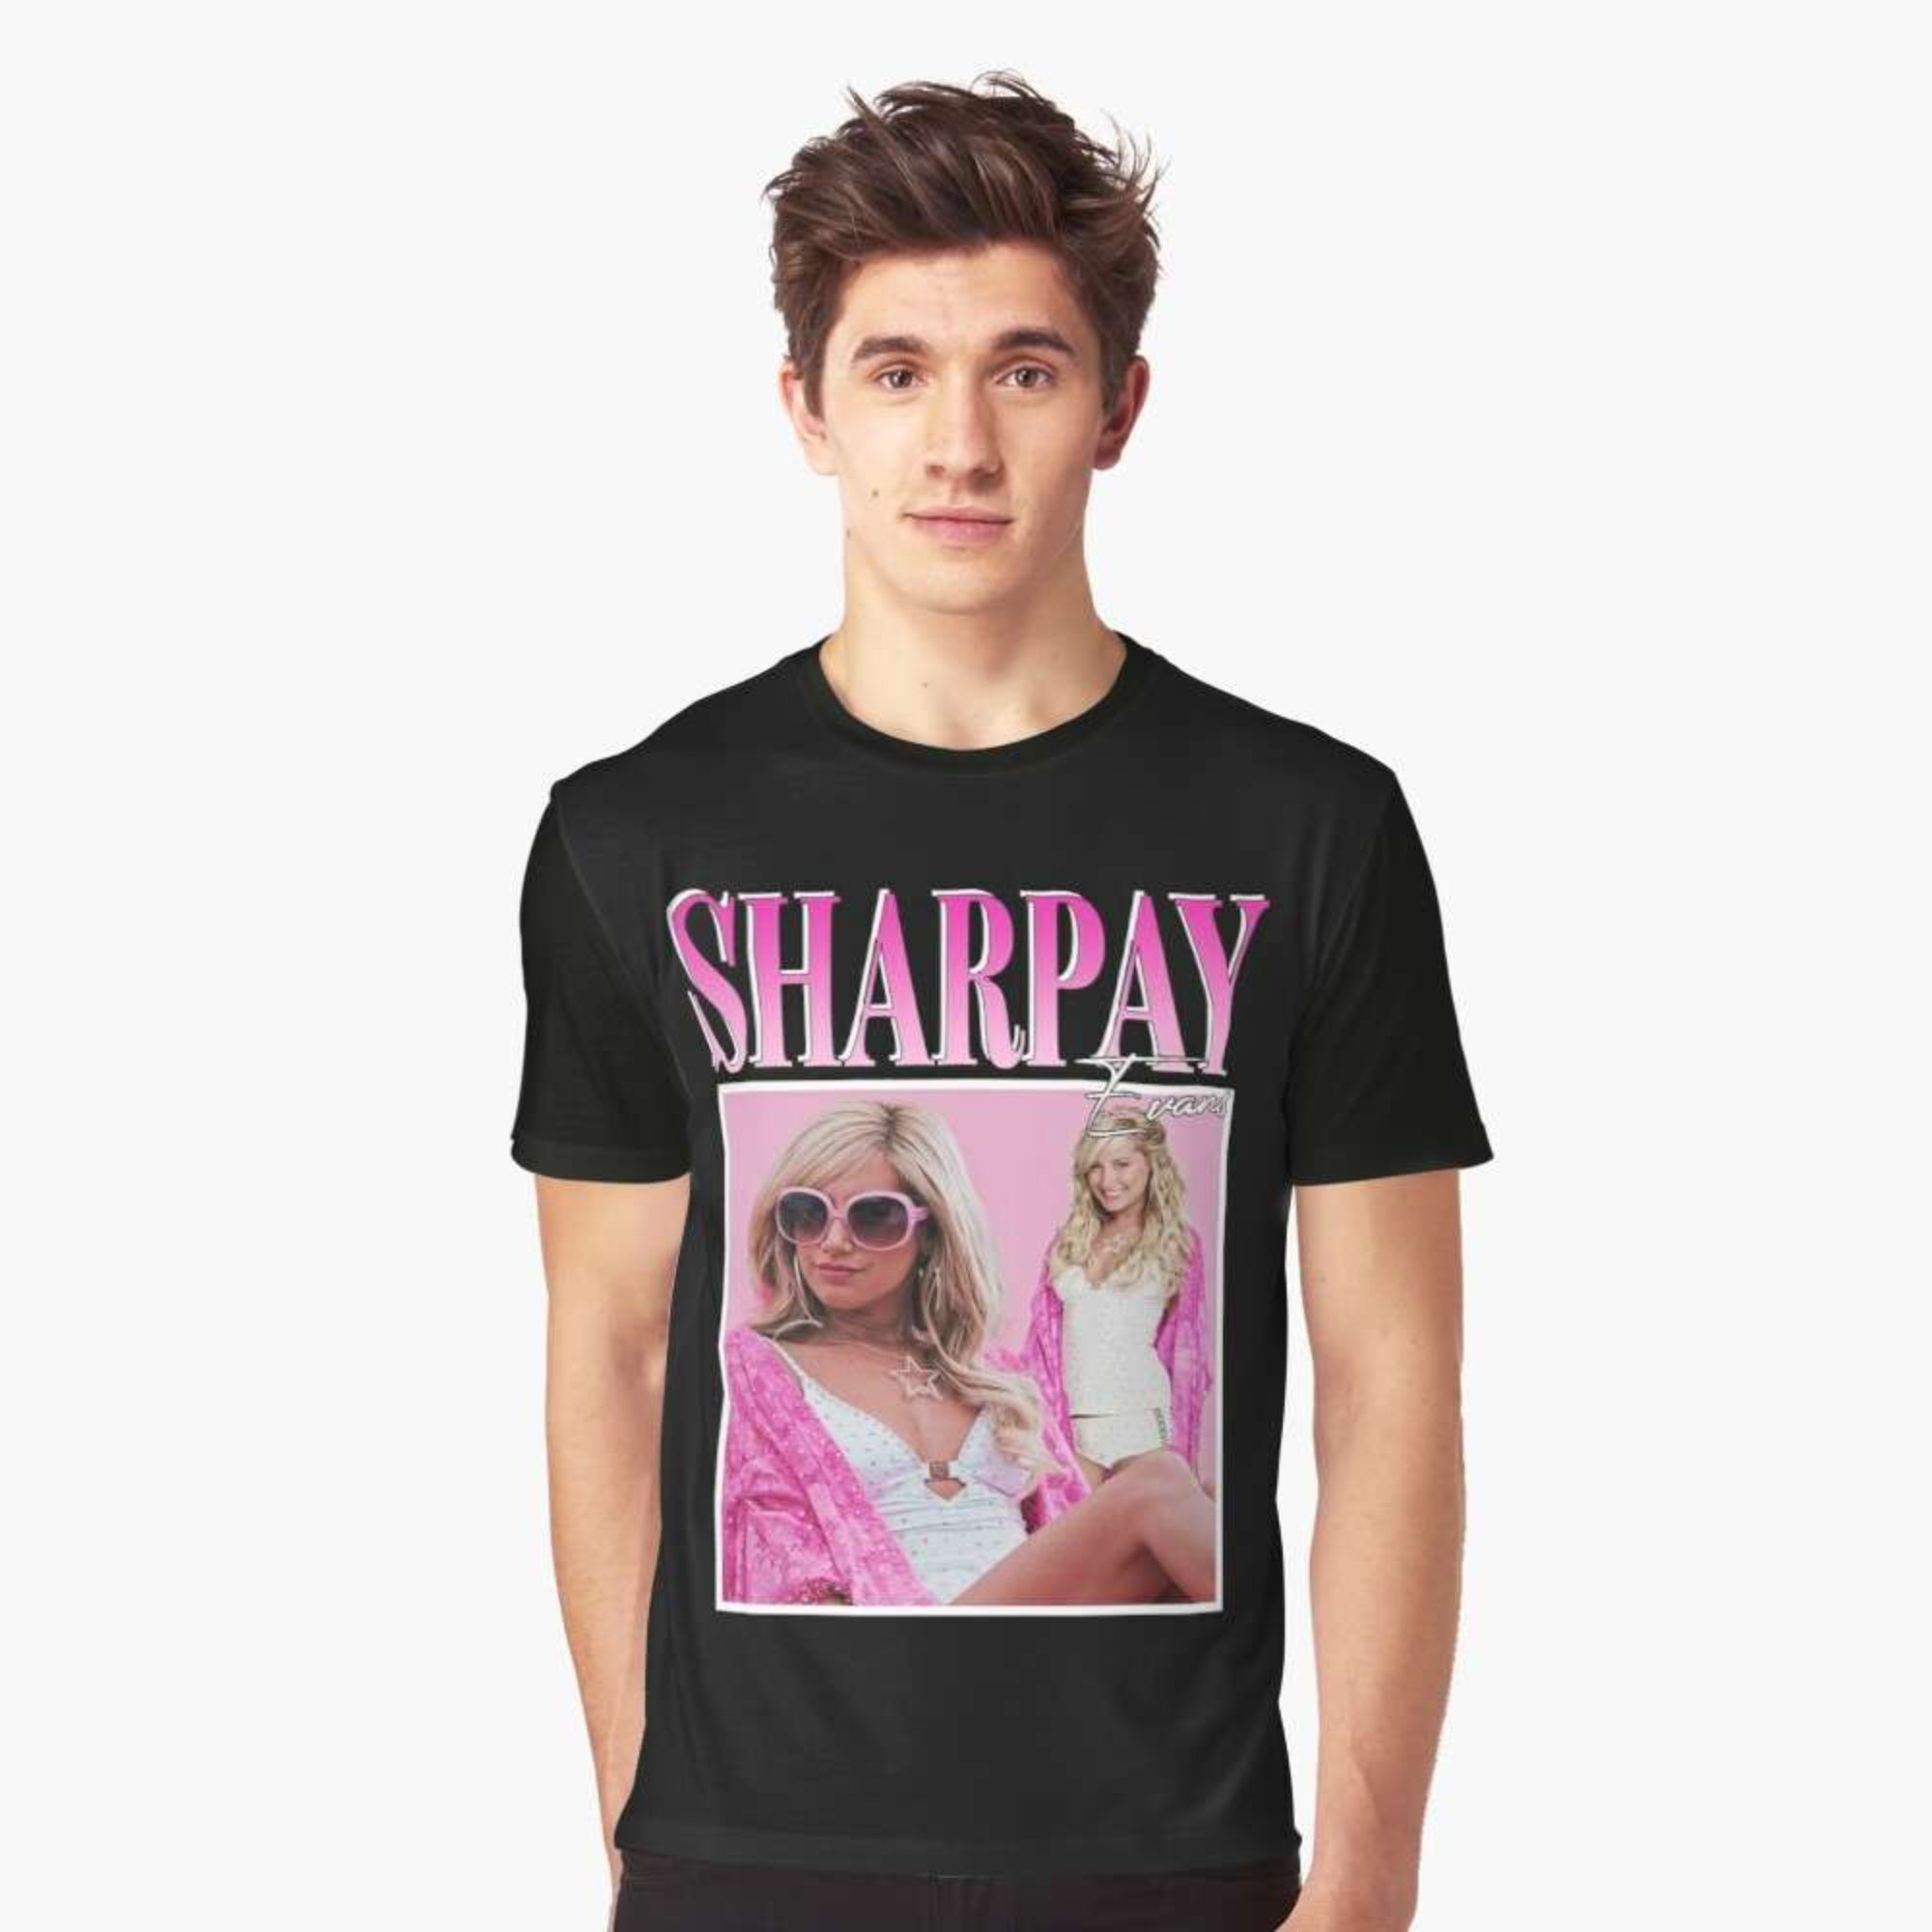 sharpay from high school musical